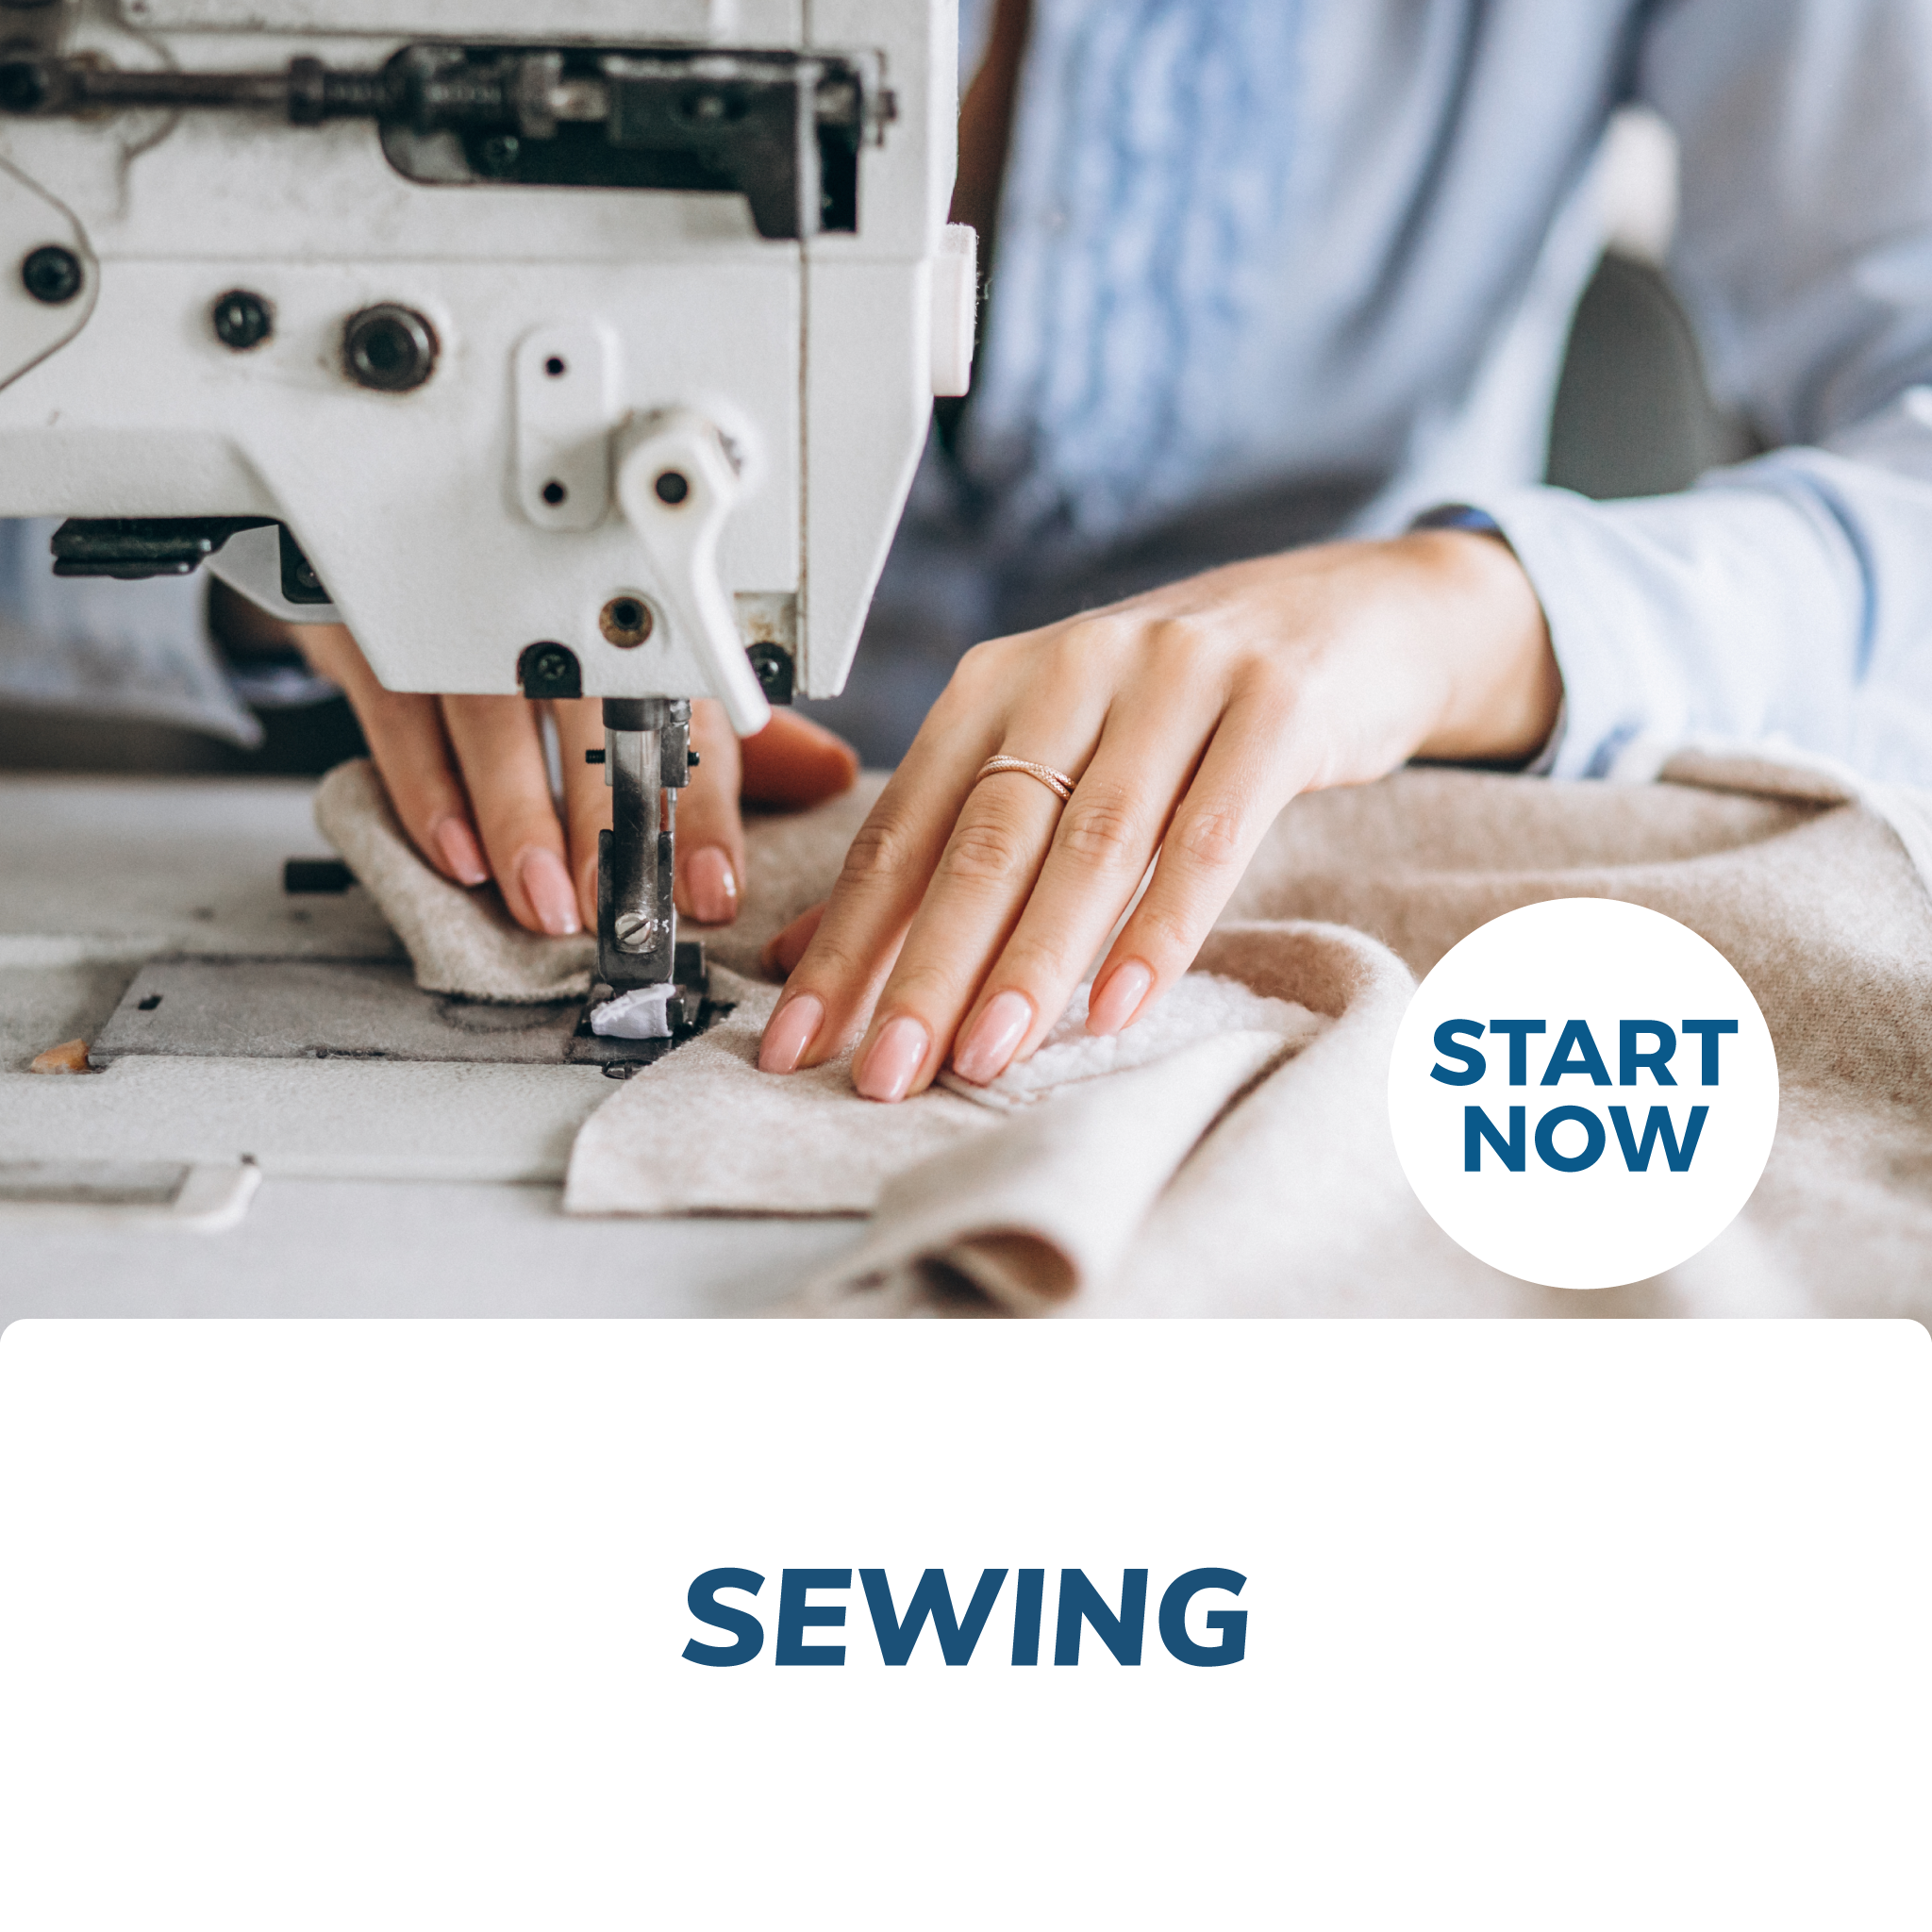 Sewing Classes, Learn To Sew With Michelle